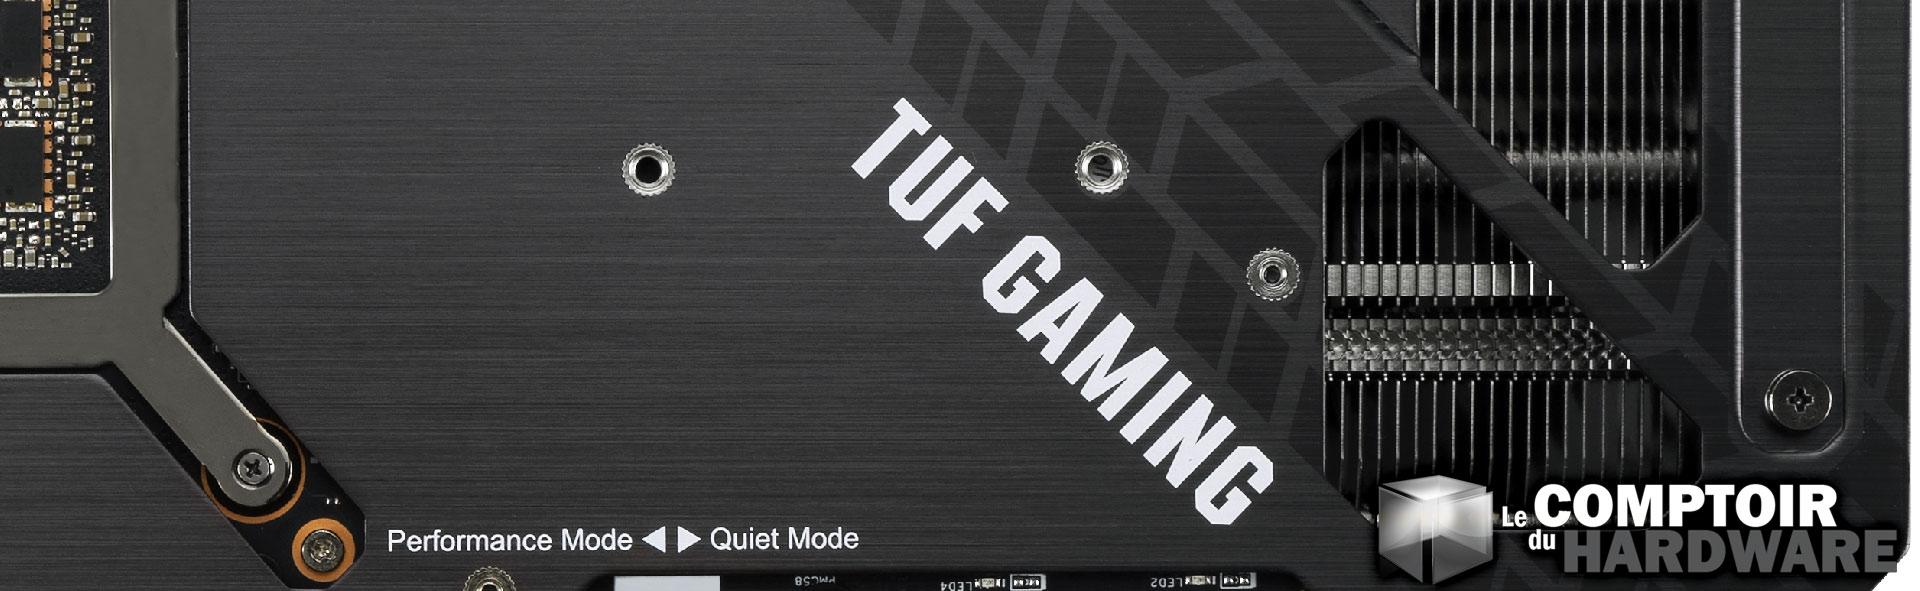 review rtx 3080 asus tuf